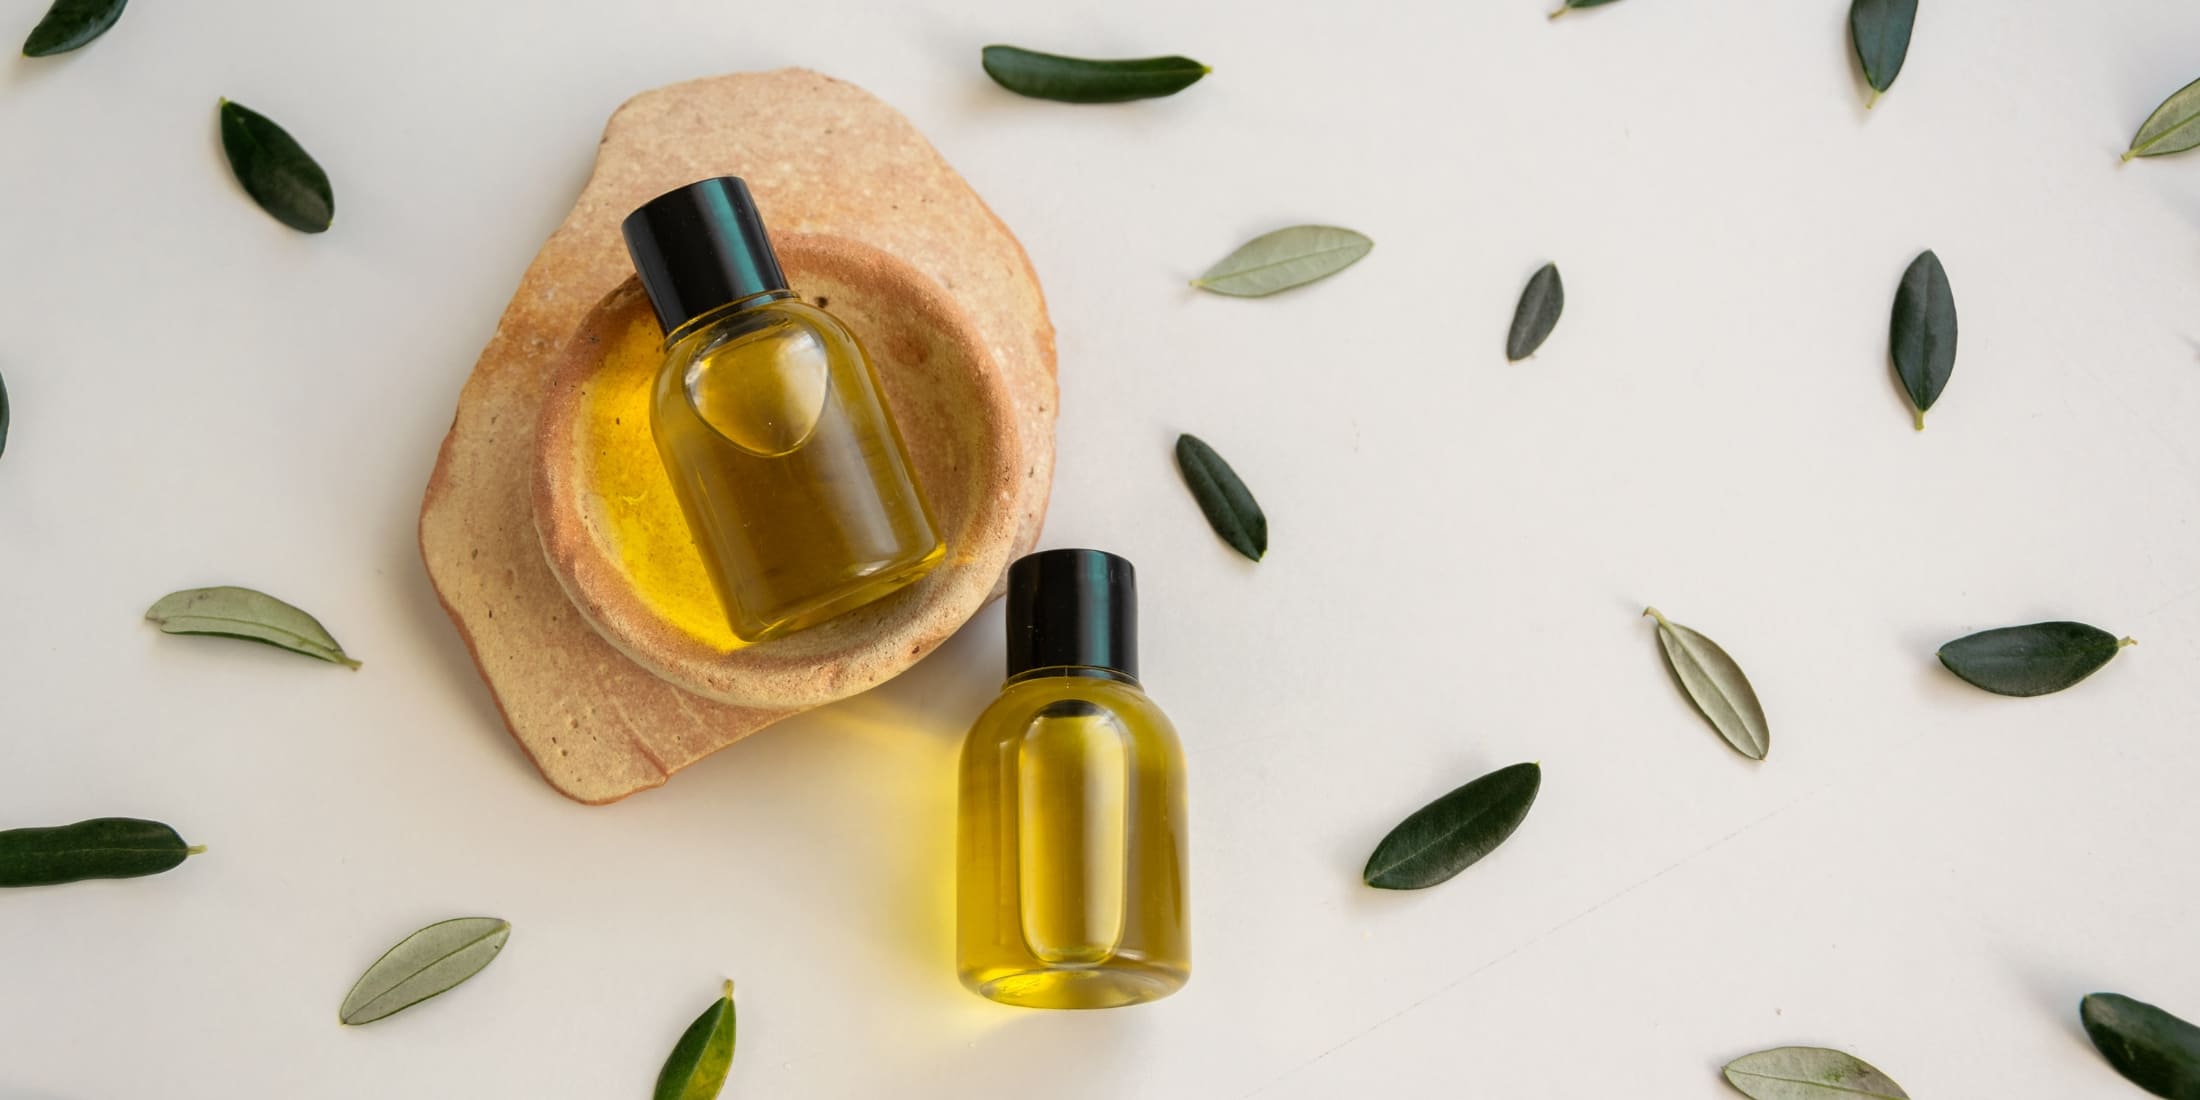 Two bottles of natural oil, potential hair clipper oil alternatives, placed on a stone dish amidst scattered green leaves on a white background, embodying eco-friendly grooming options.